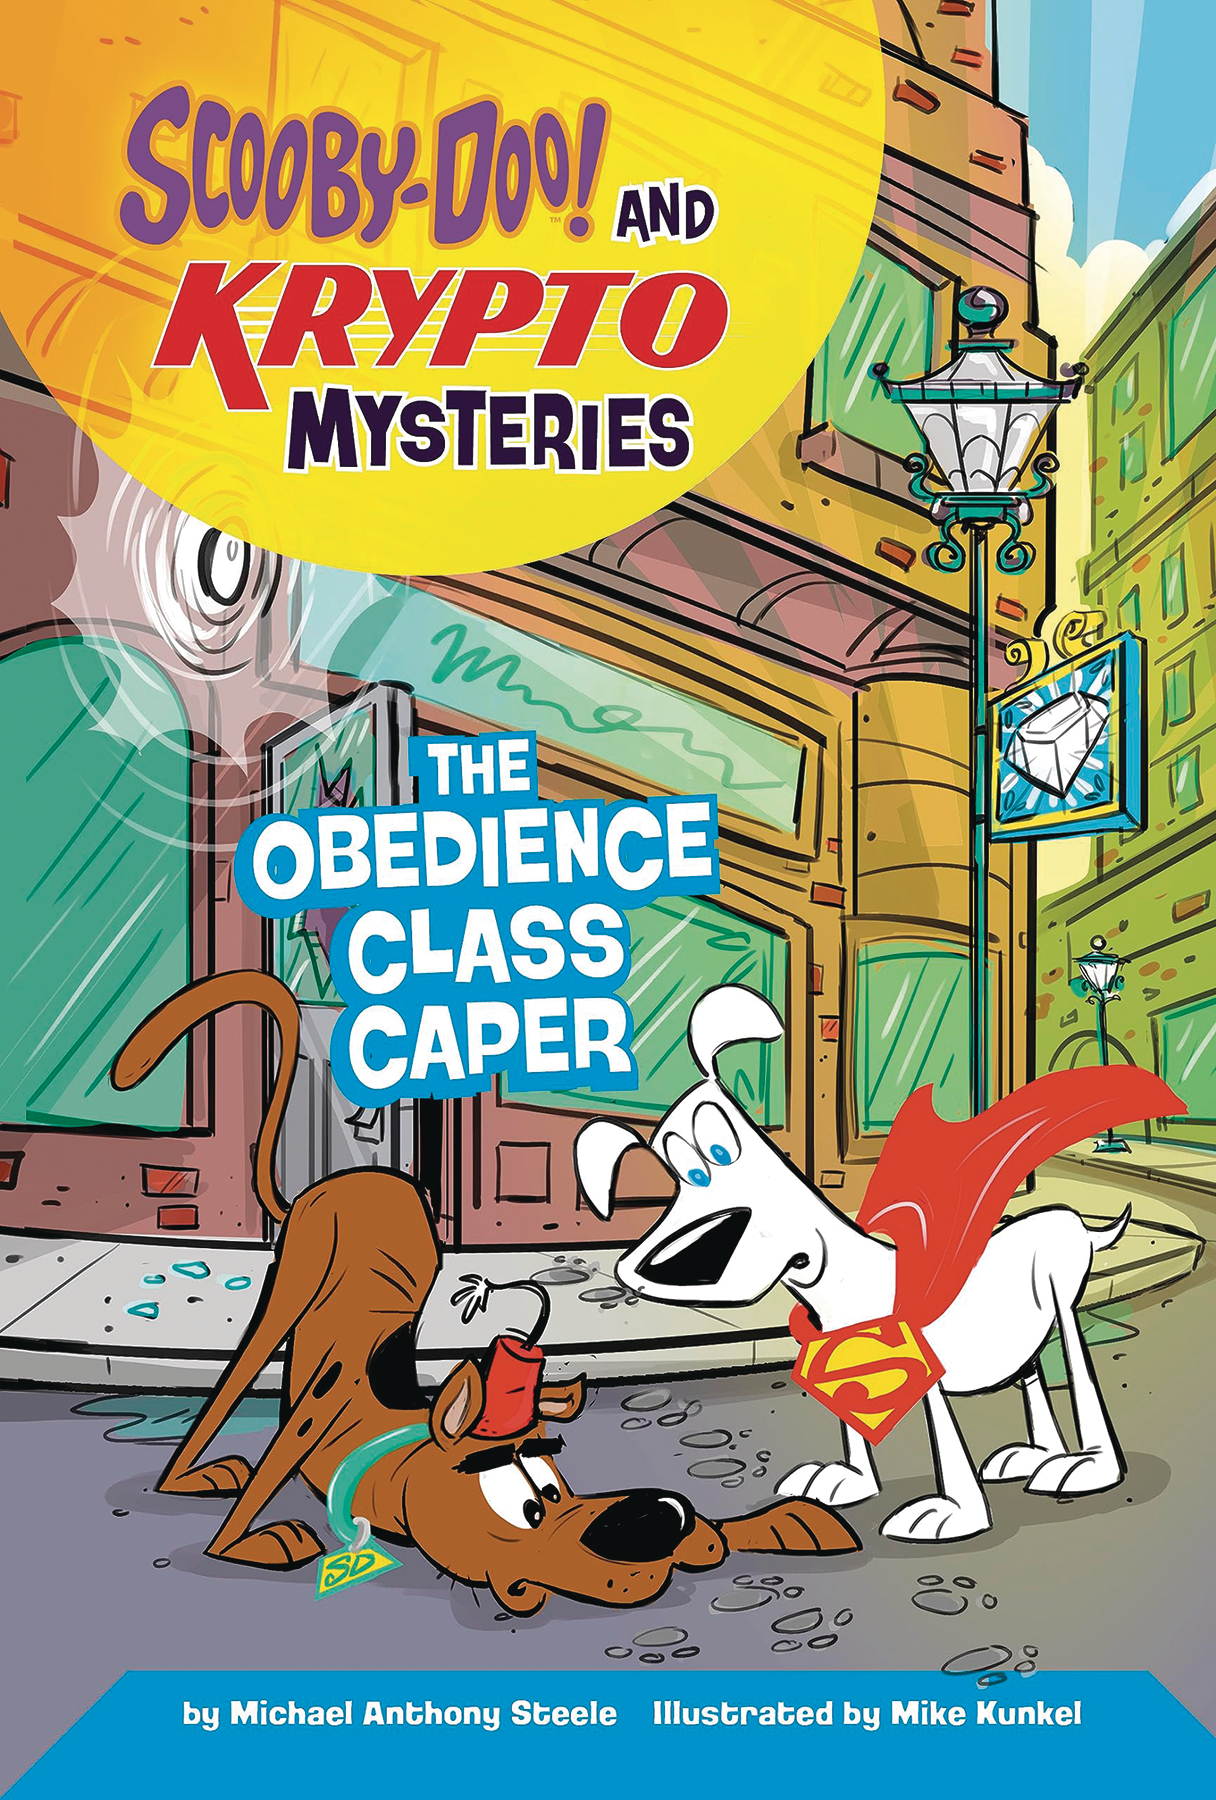 Scooby Doo & Krypto Mysteries Soft Cover #4 Obedience Class Caper